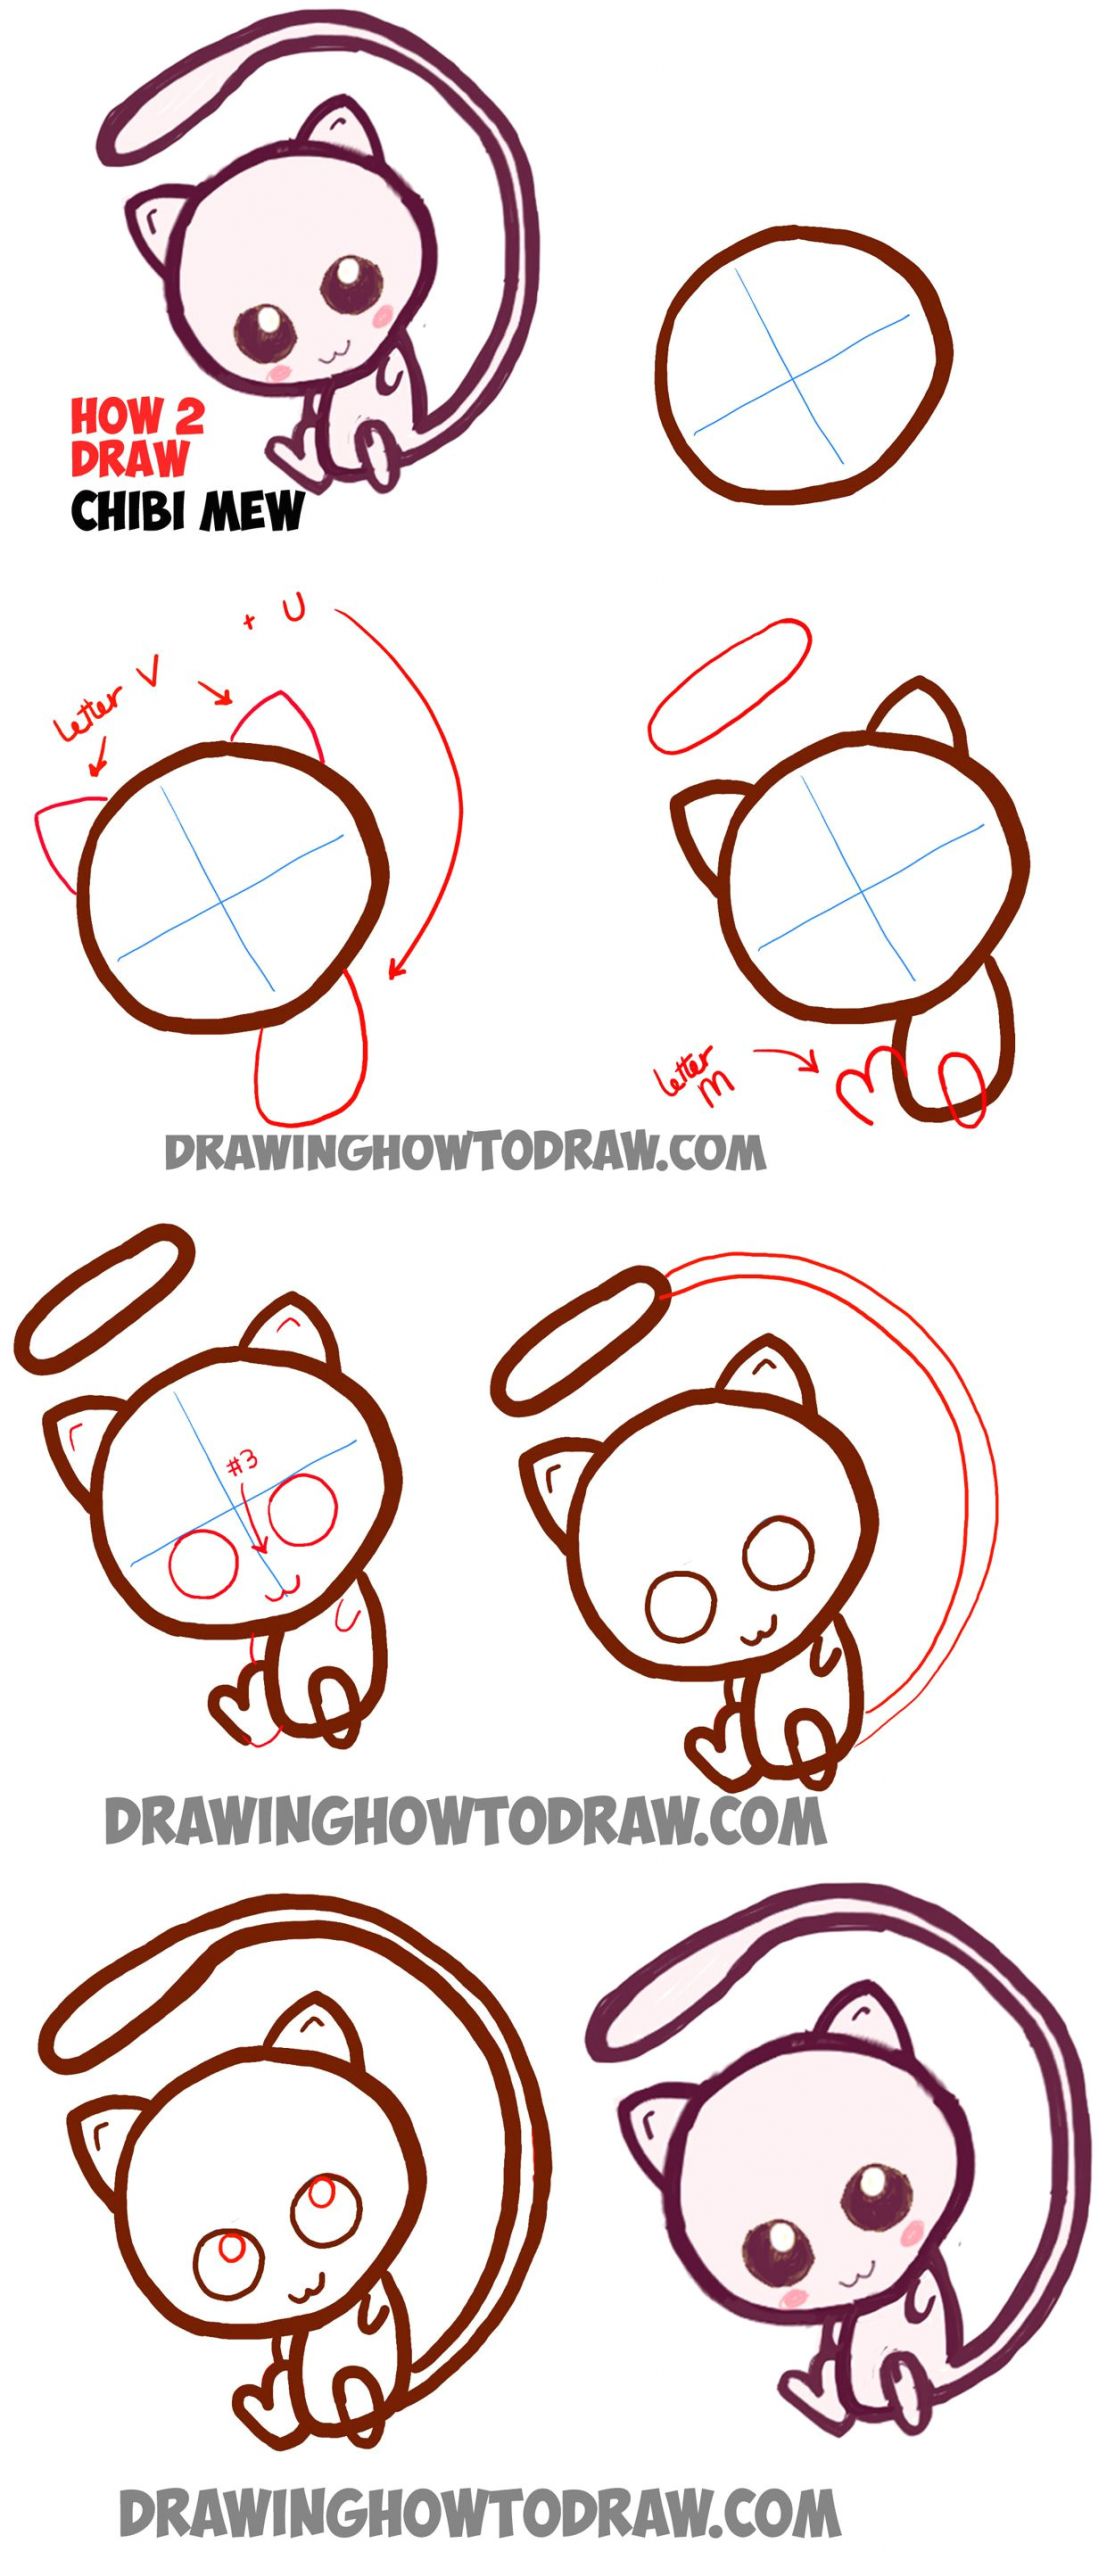 Easy Drawing Of A Baby How to Draw Cute Baby Chibi Mew From Pokemon Easy Step by